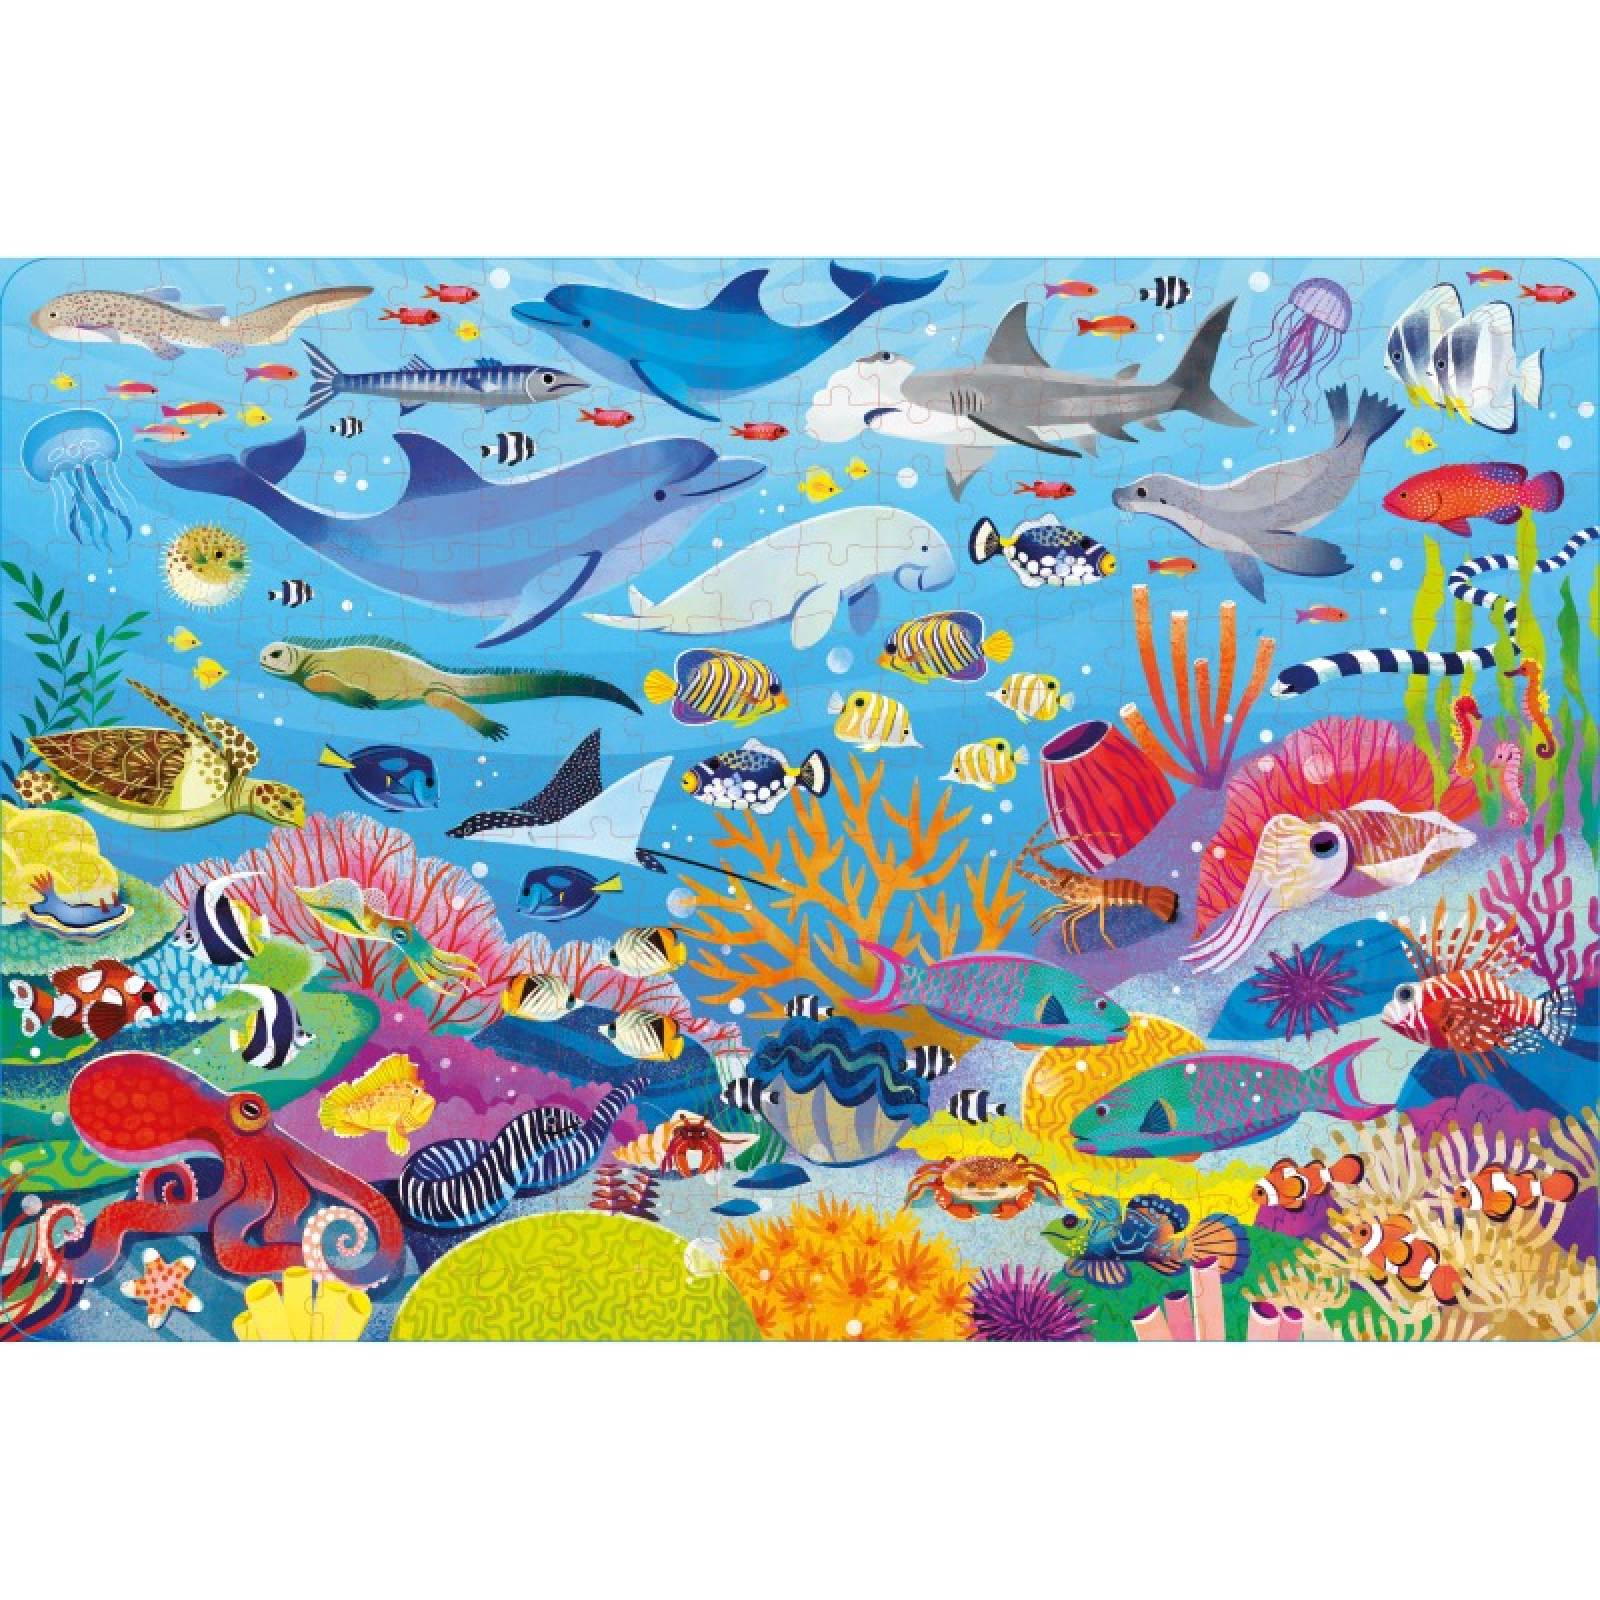 Coral Reef - 300 Piece Jigsaw Puzzle & Book thumbnails